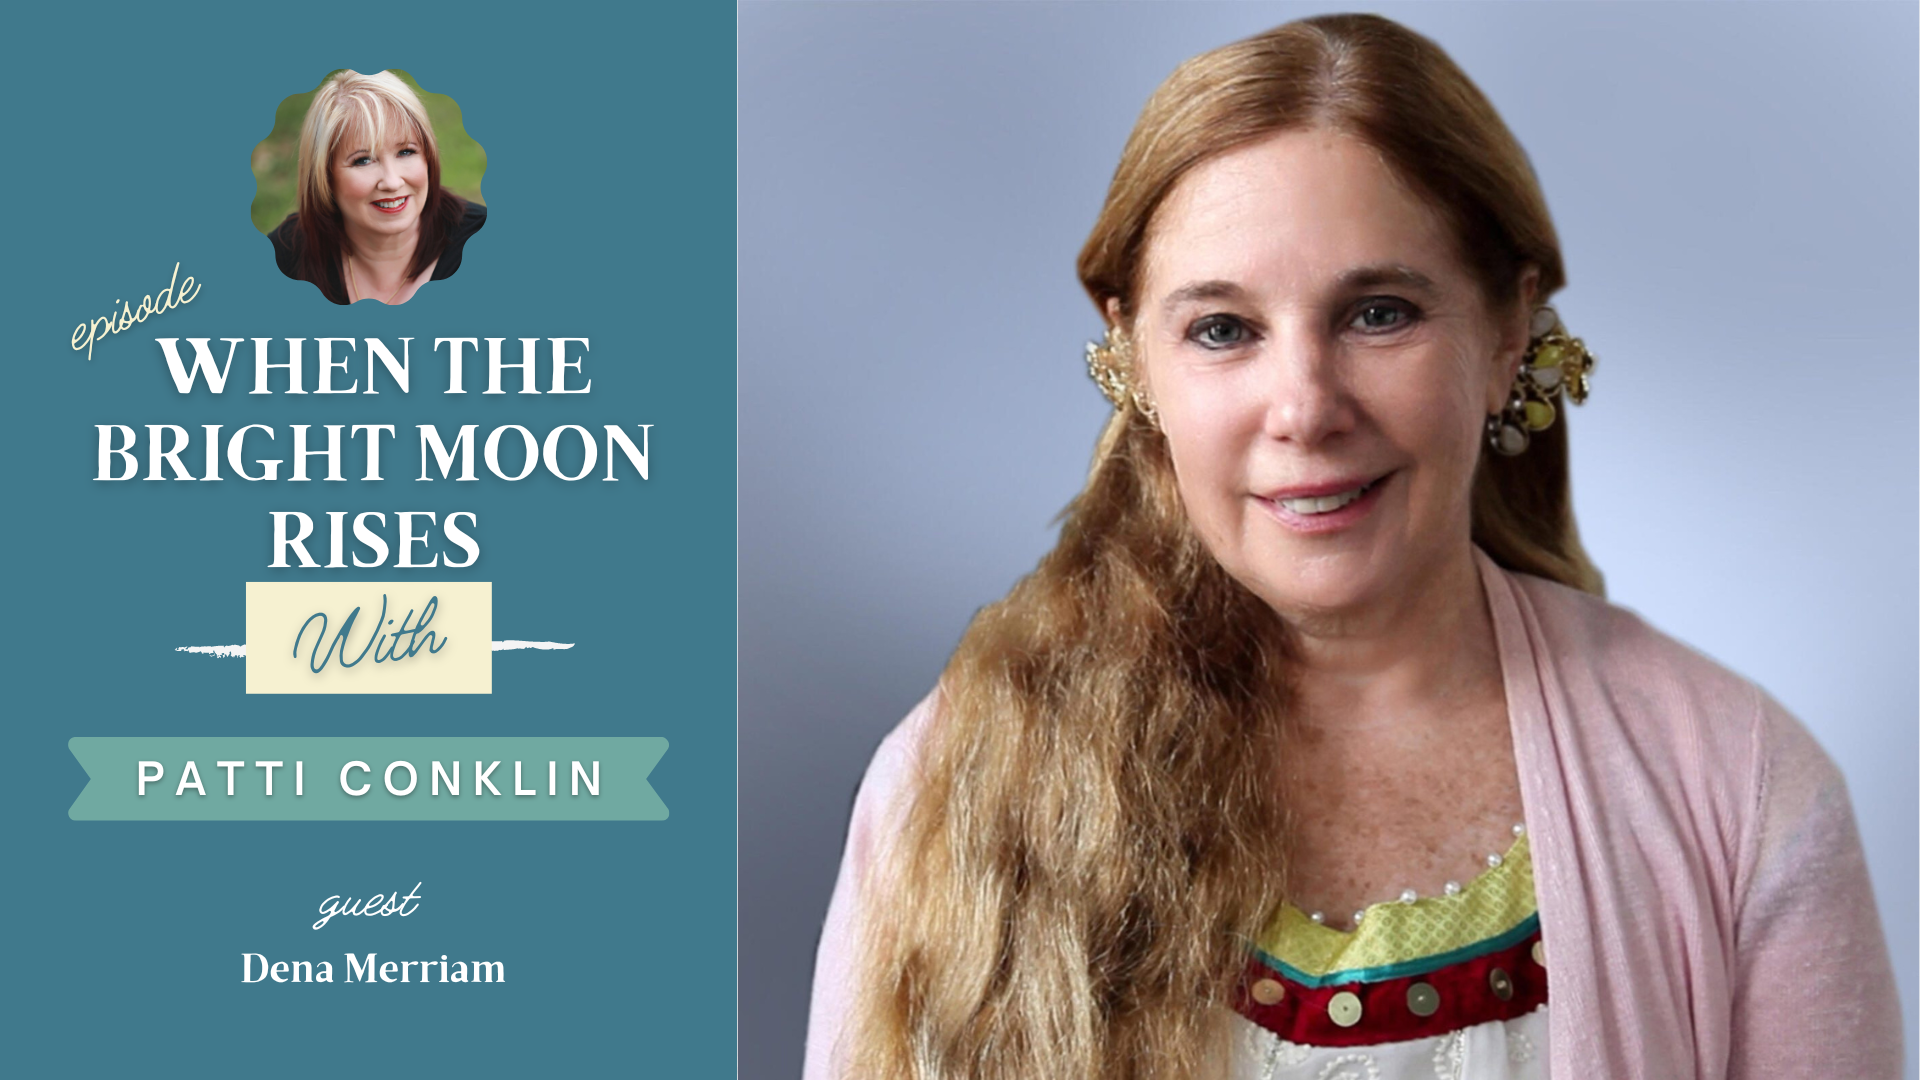 When the Bright Moon Rises with guest Dena Marriam and host Patti Conklin